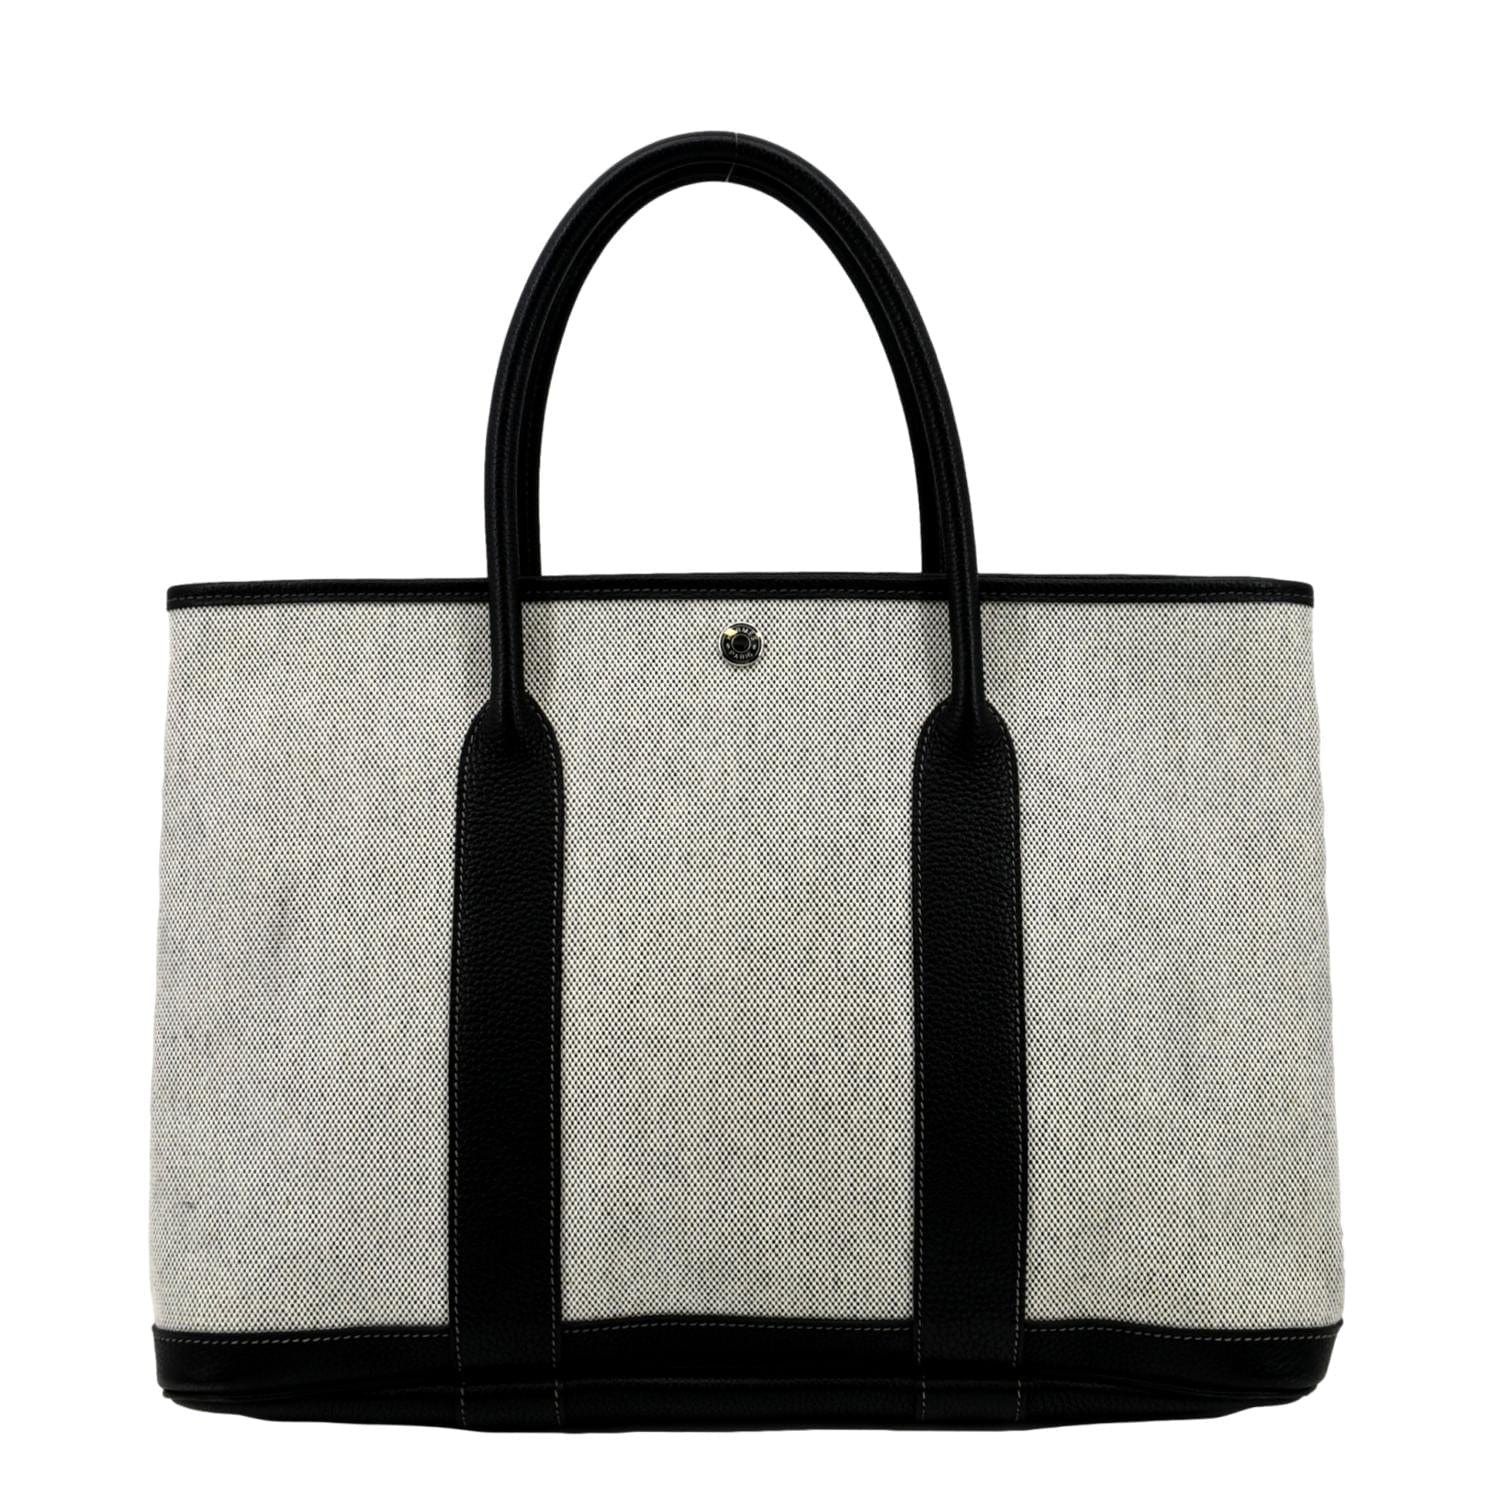 Hermes Garden Party mm Toile Bag in Black | Lord & Taylor